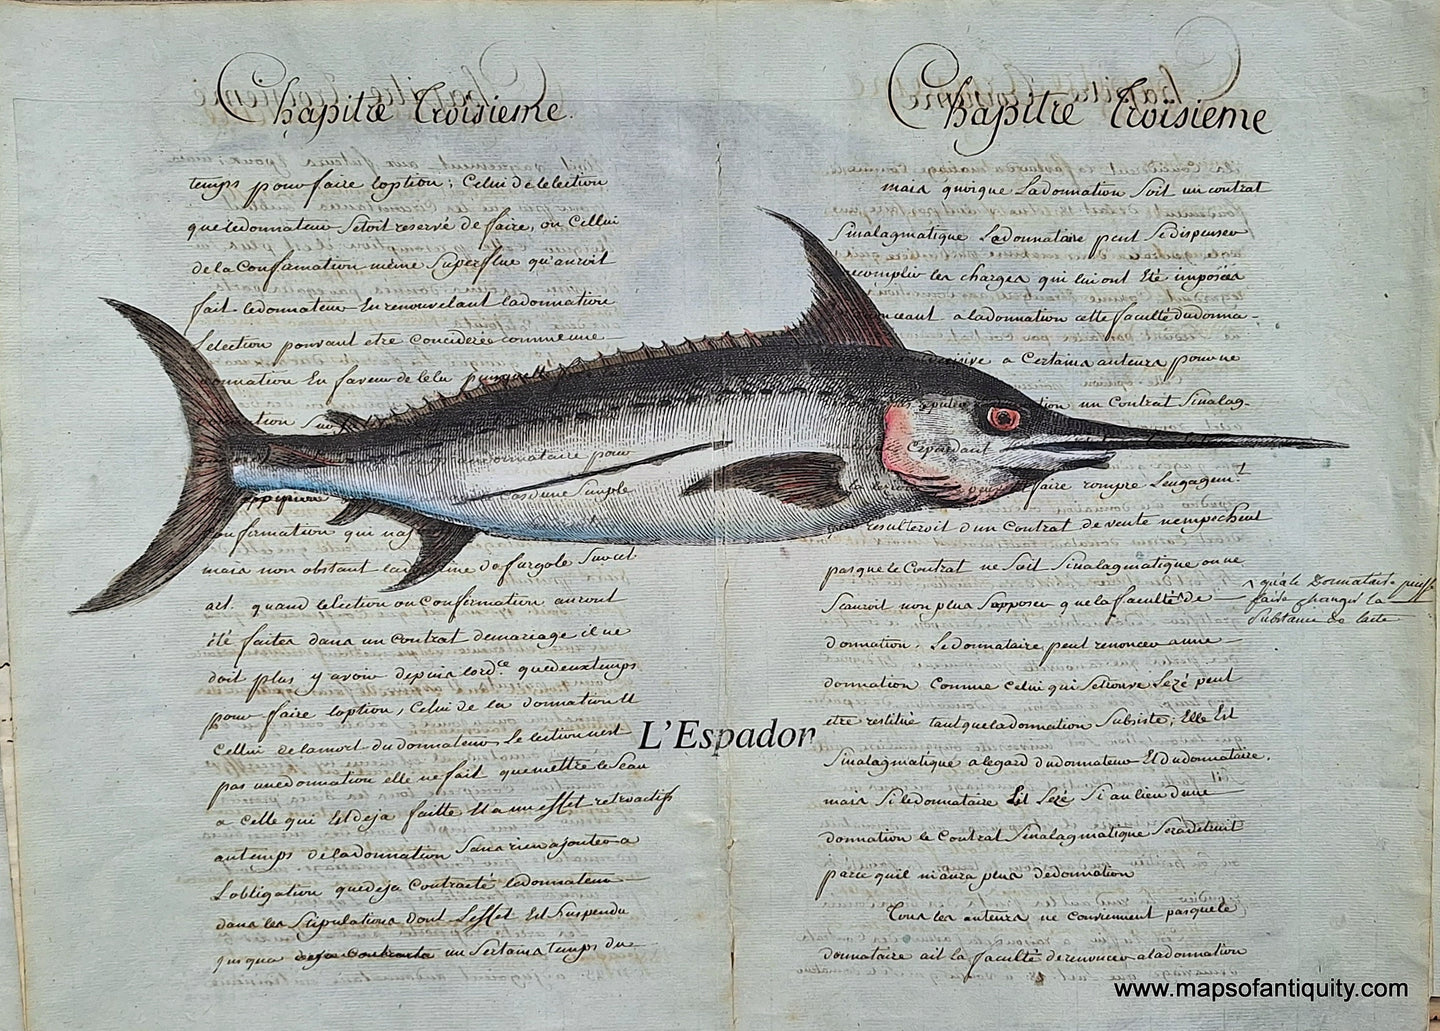 Red-Specialty-Reproduction-L'Espadon-swordfish-Reproduction-on-Antique-Paper-Digitally-Engraved-Specialty-Reproduction---Reproduction-Maps-Of-Antiquity